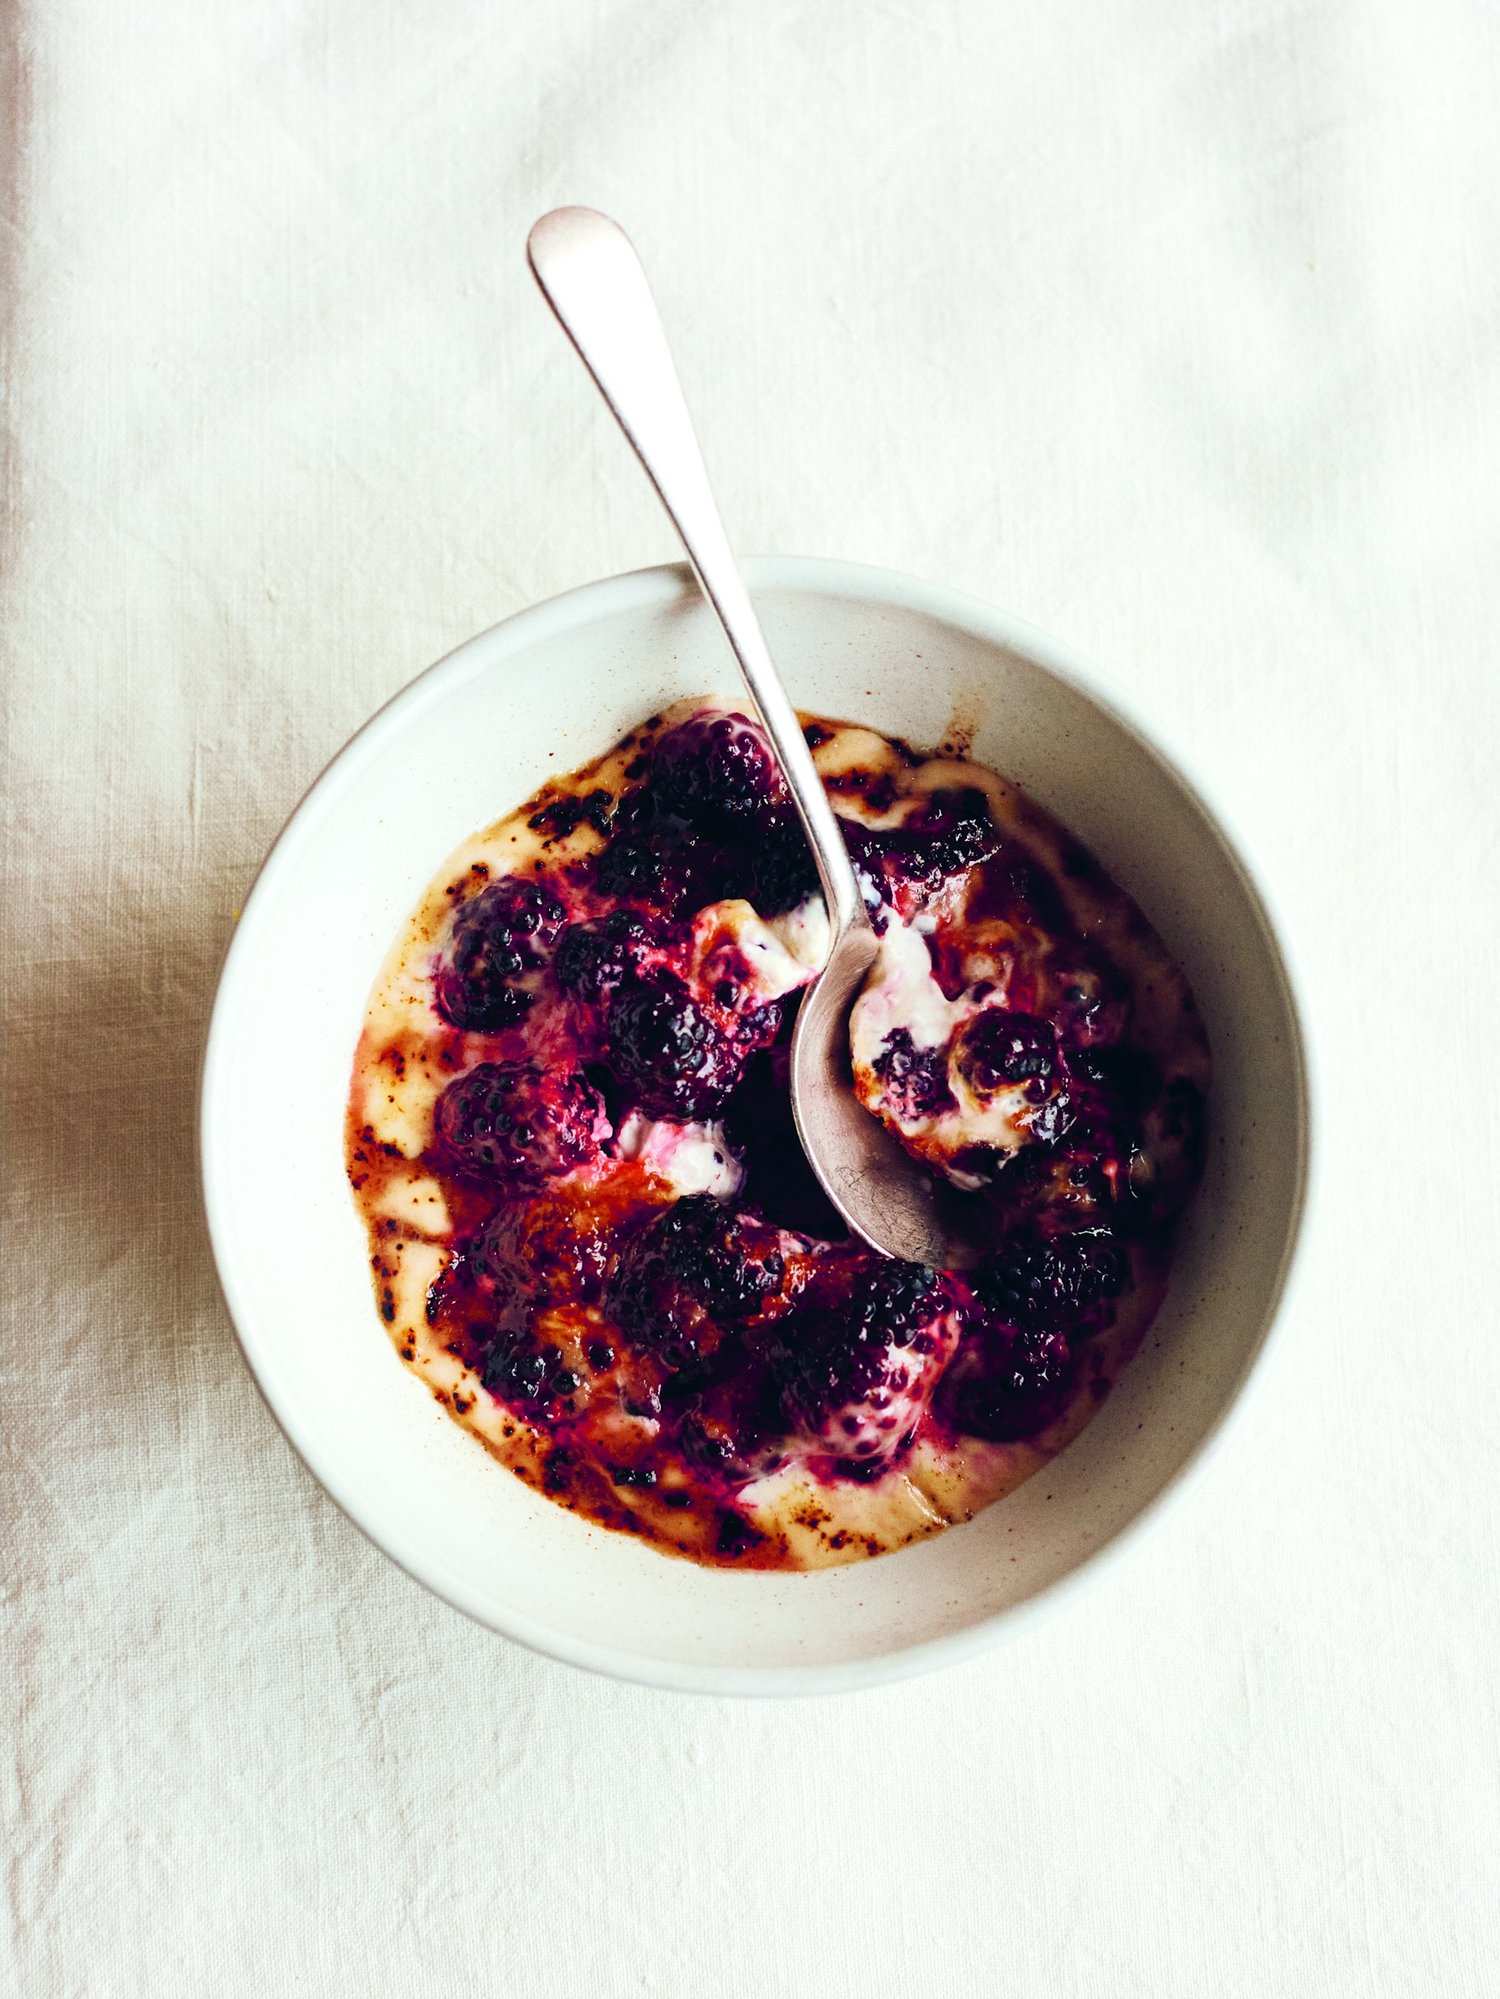 Bramble brûlée from Cooking: Simply and Well, for One or Many